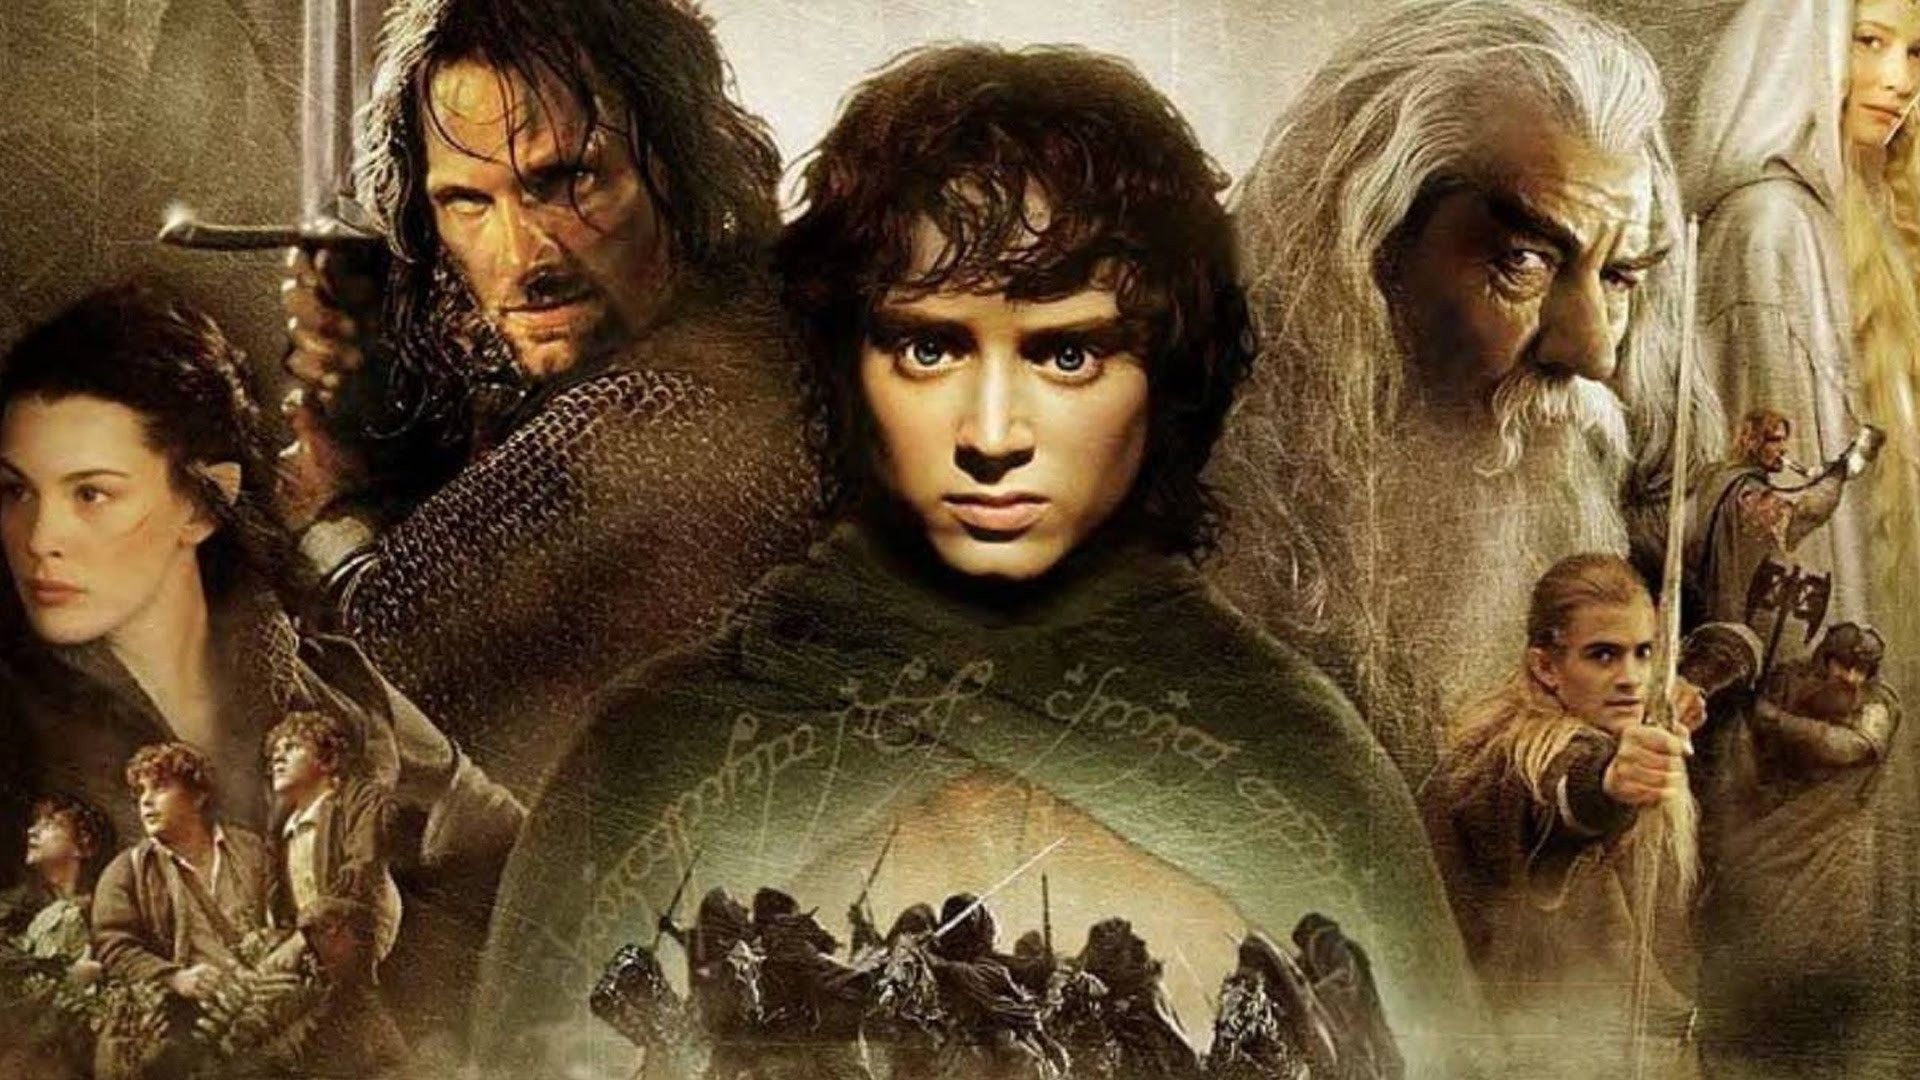 The New Billion-Dollar 'LOTR' Show Has Crew Just for Working with Dust